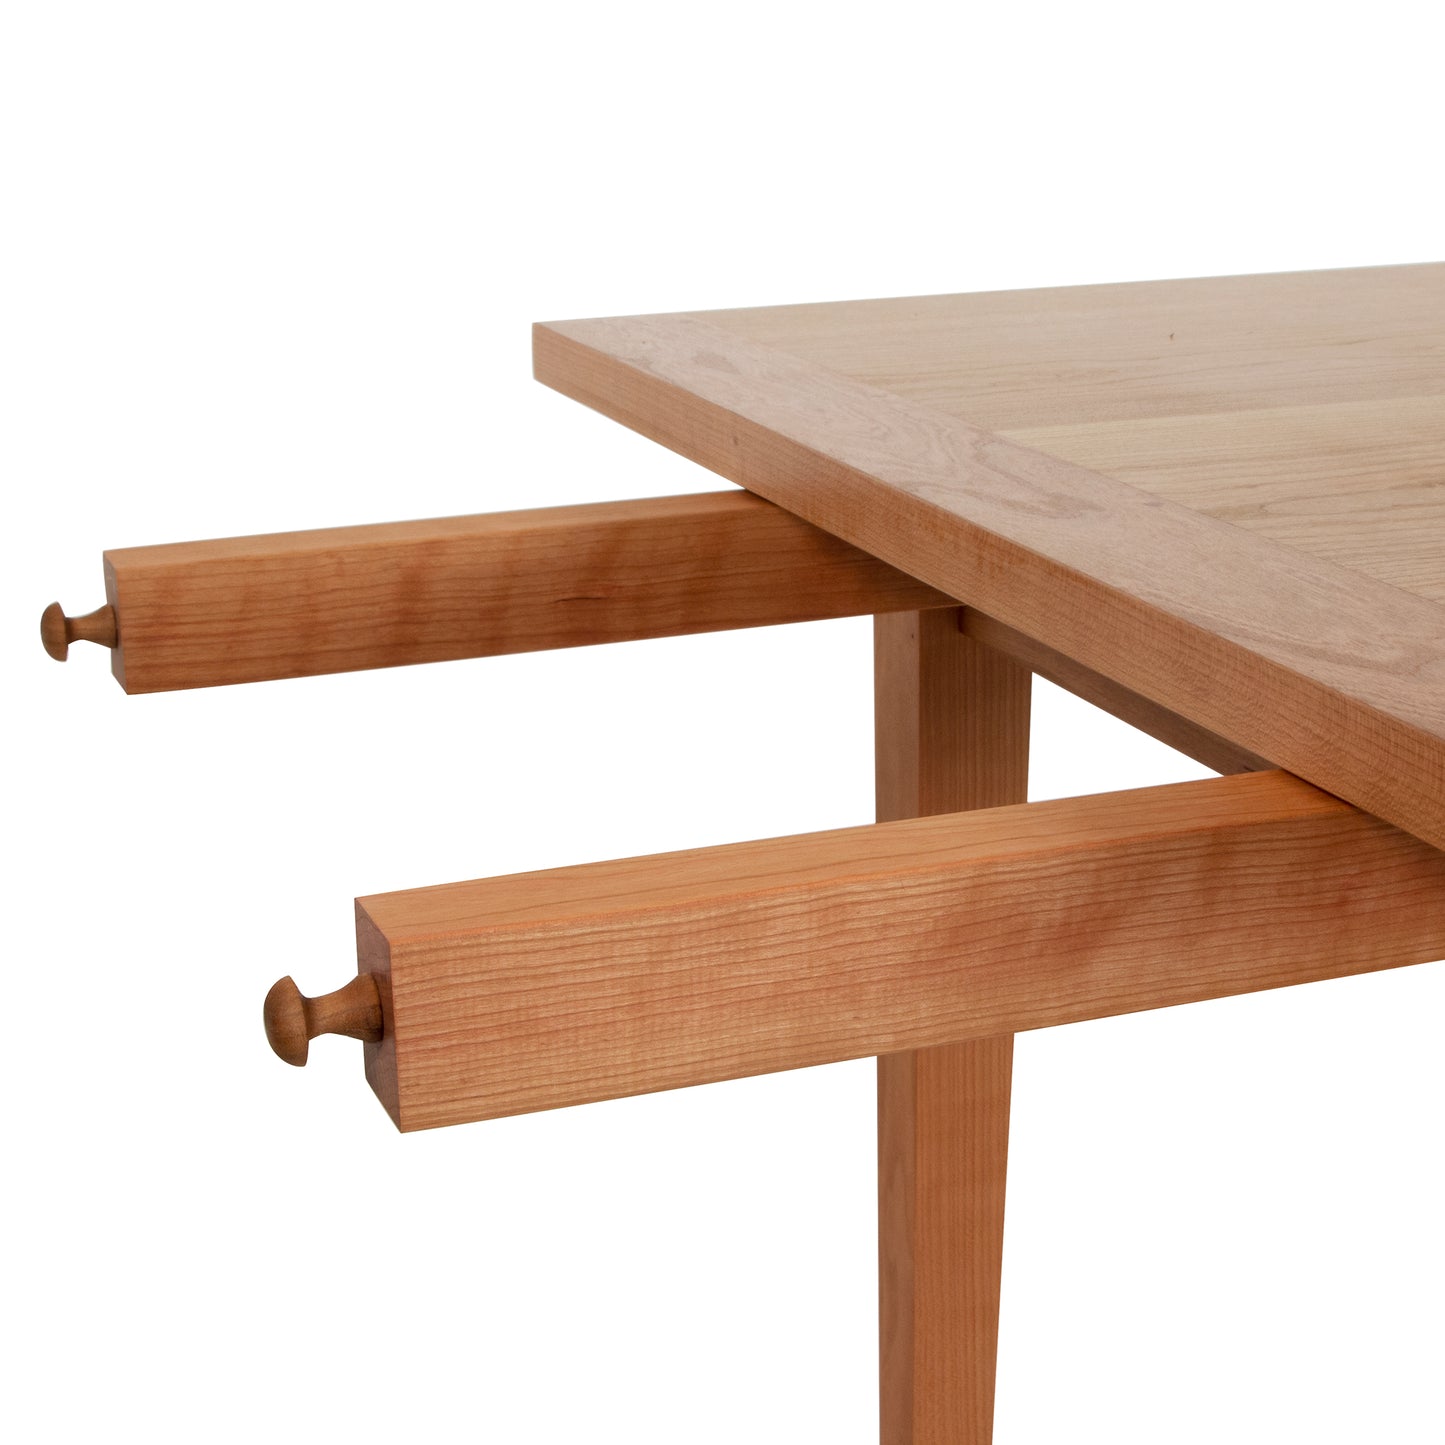 Close-up of a Maple Corner Woodworks Vermont Shaker Harvest Extension Dining Table, with extendable sections partially pulled out, showcasing the sustainably harvested woods.